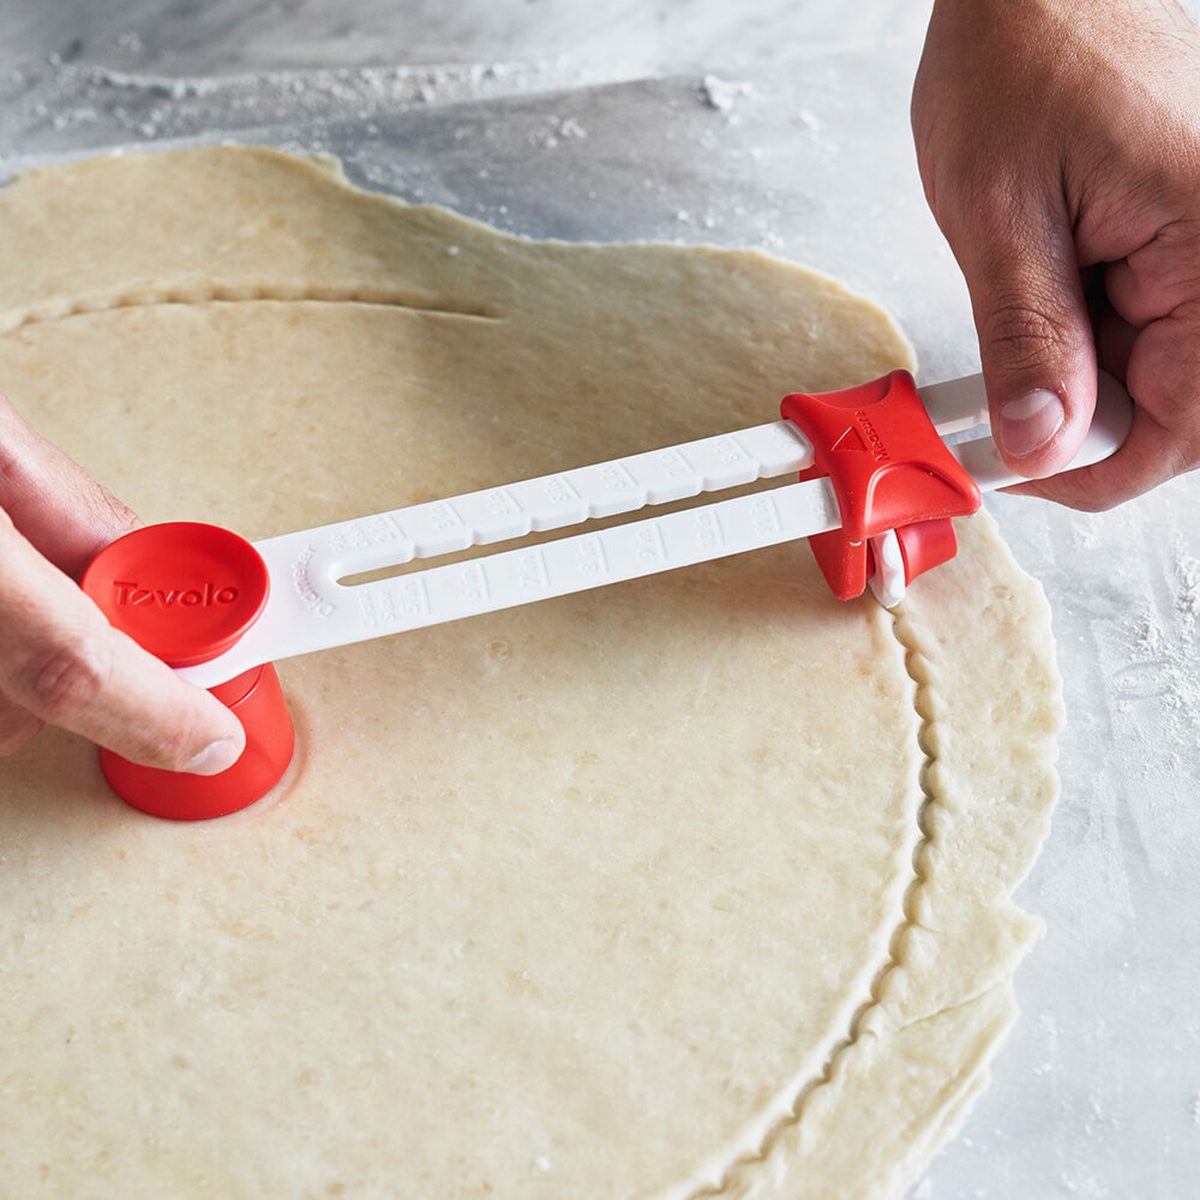 Pizza Plastic Baking Tools Pie Crust Shape Cutter Pie Slices Home Cooking Baking Gadgets, Gray